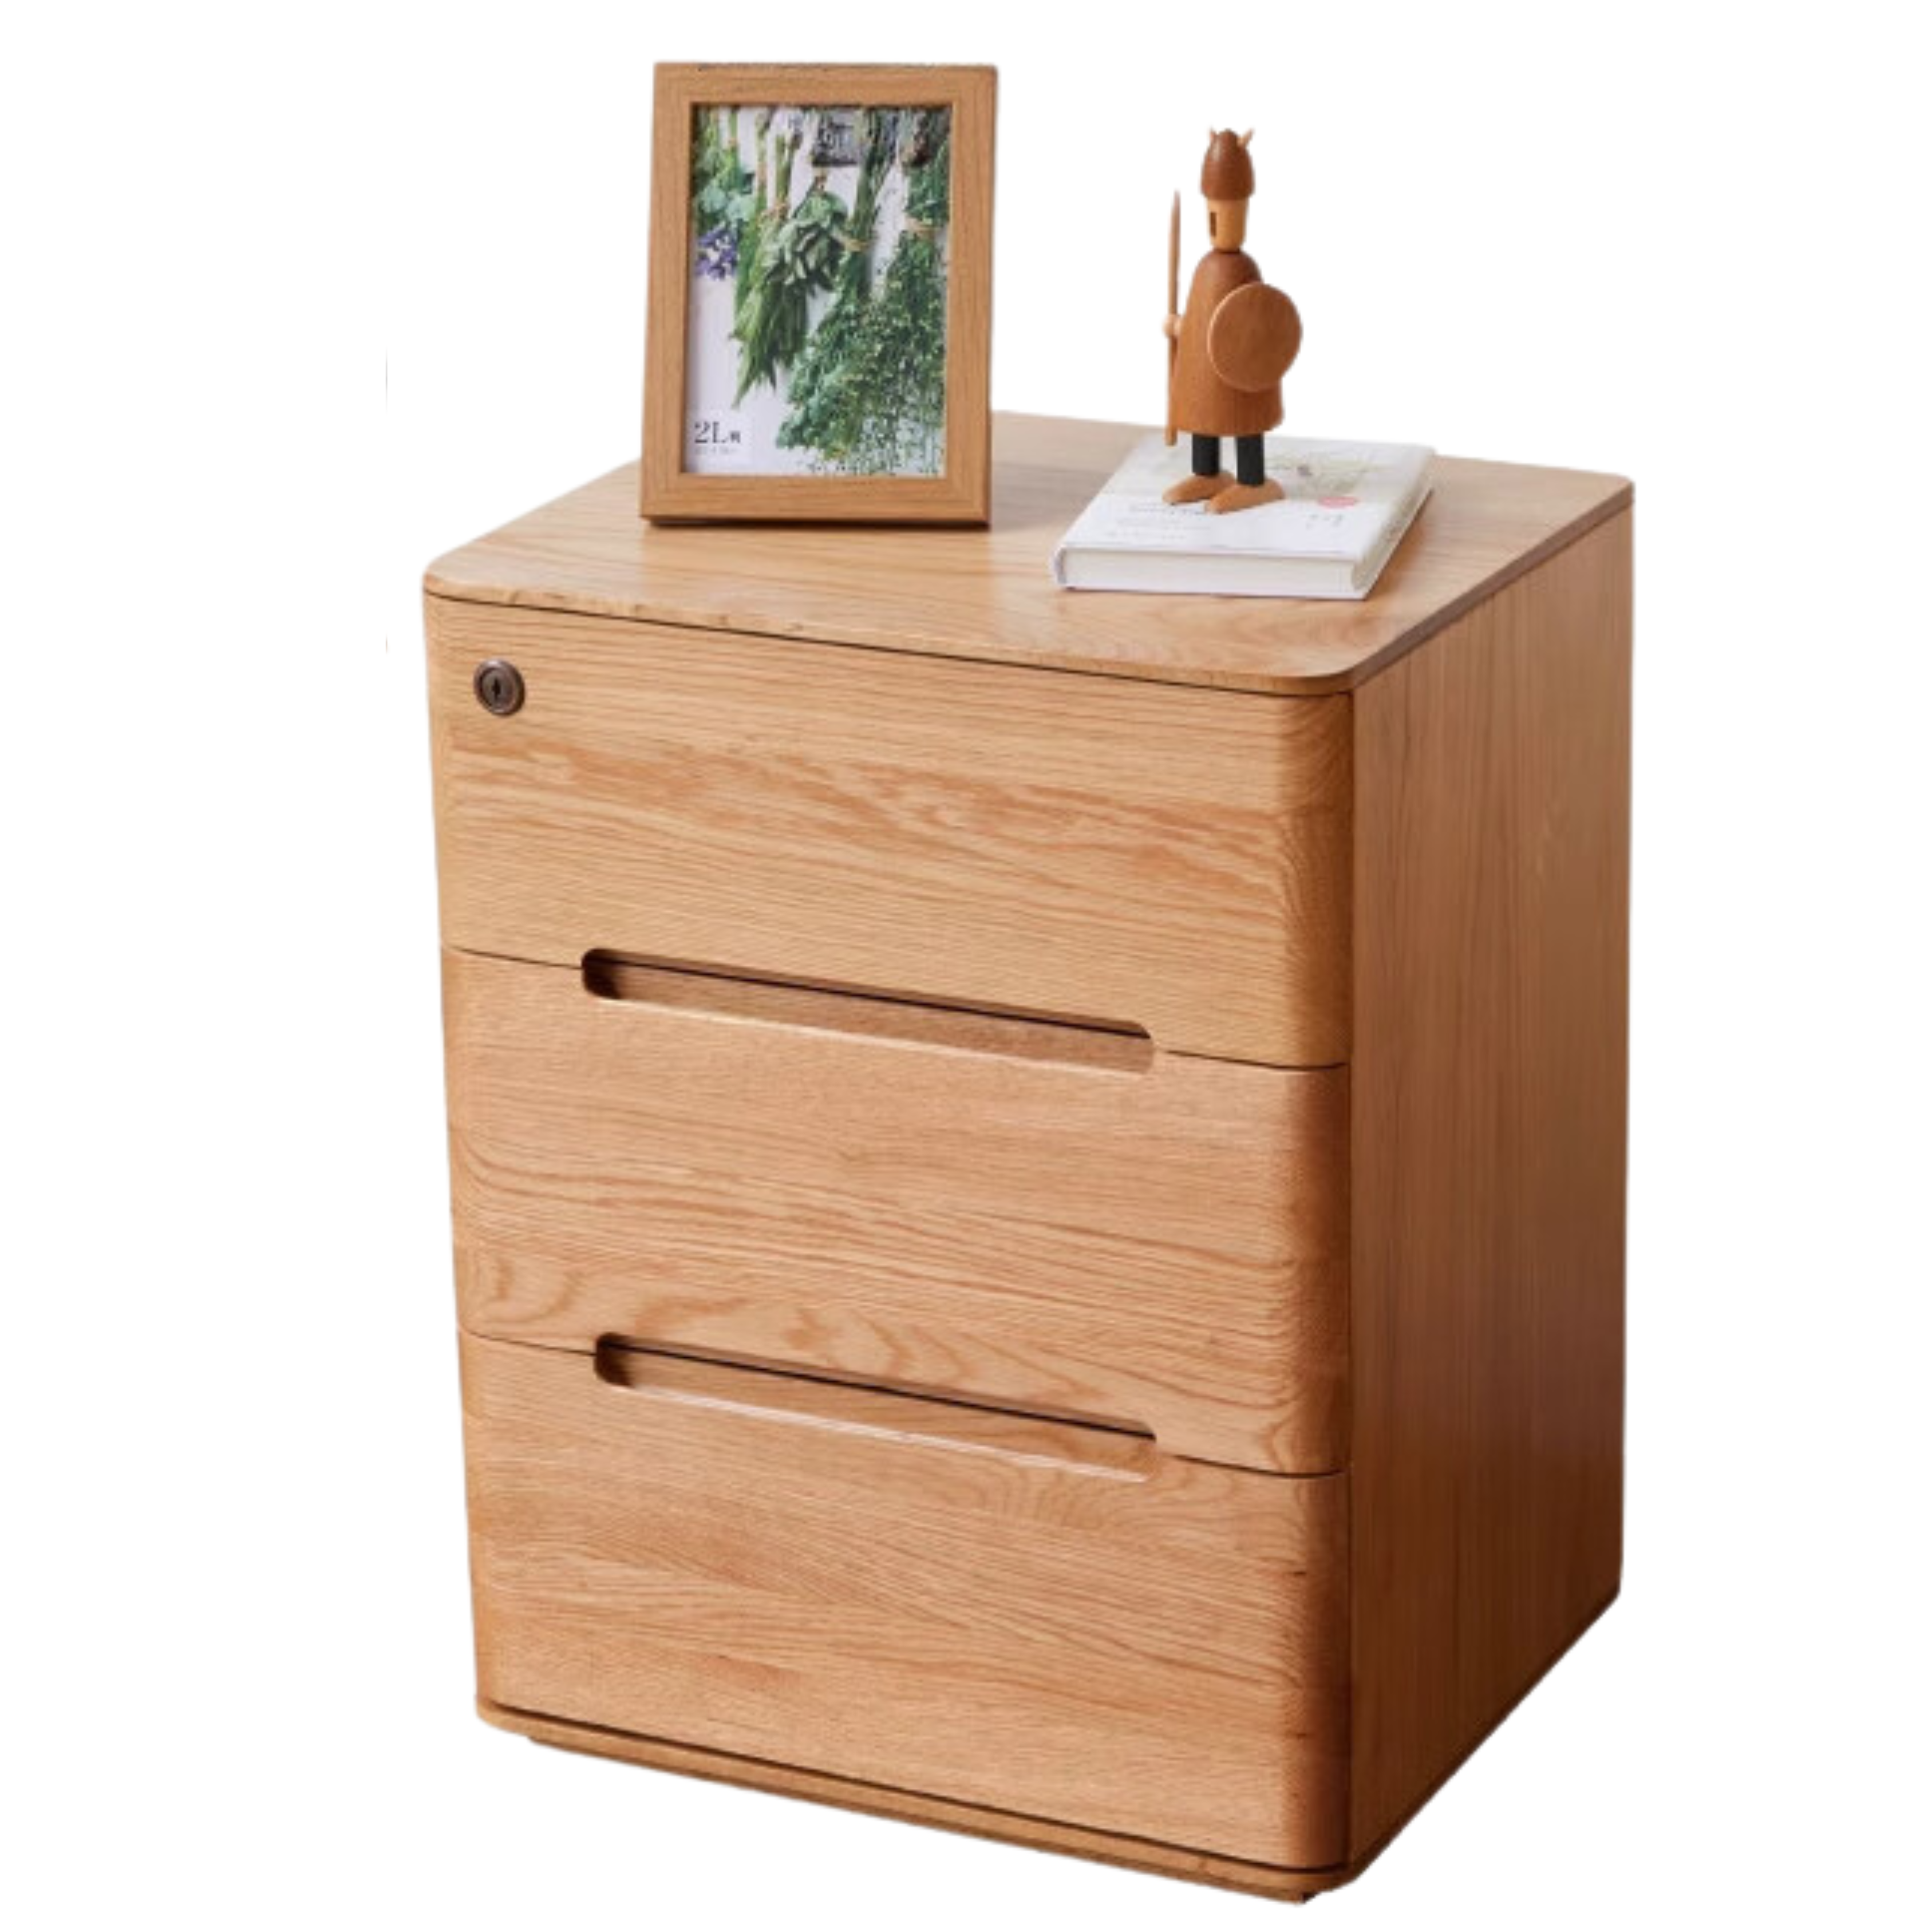 Oak solid wood Three-drawer nightstand with lock)